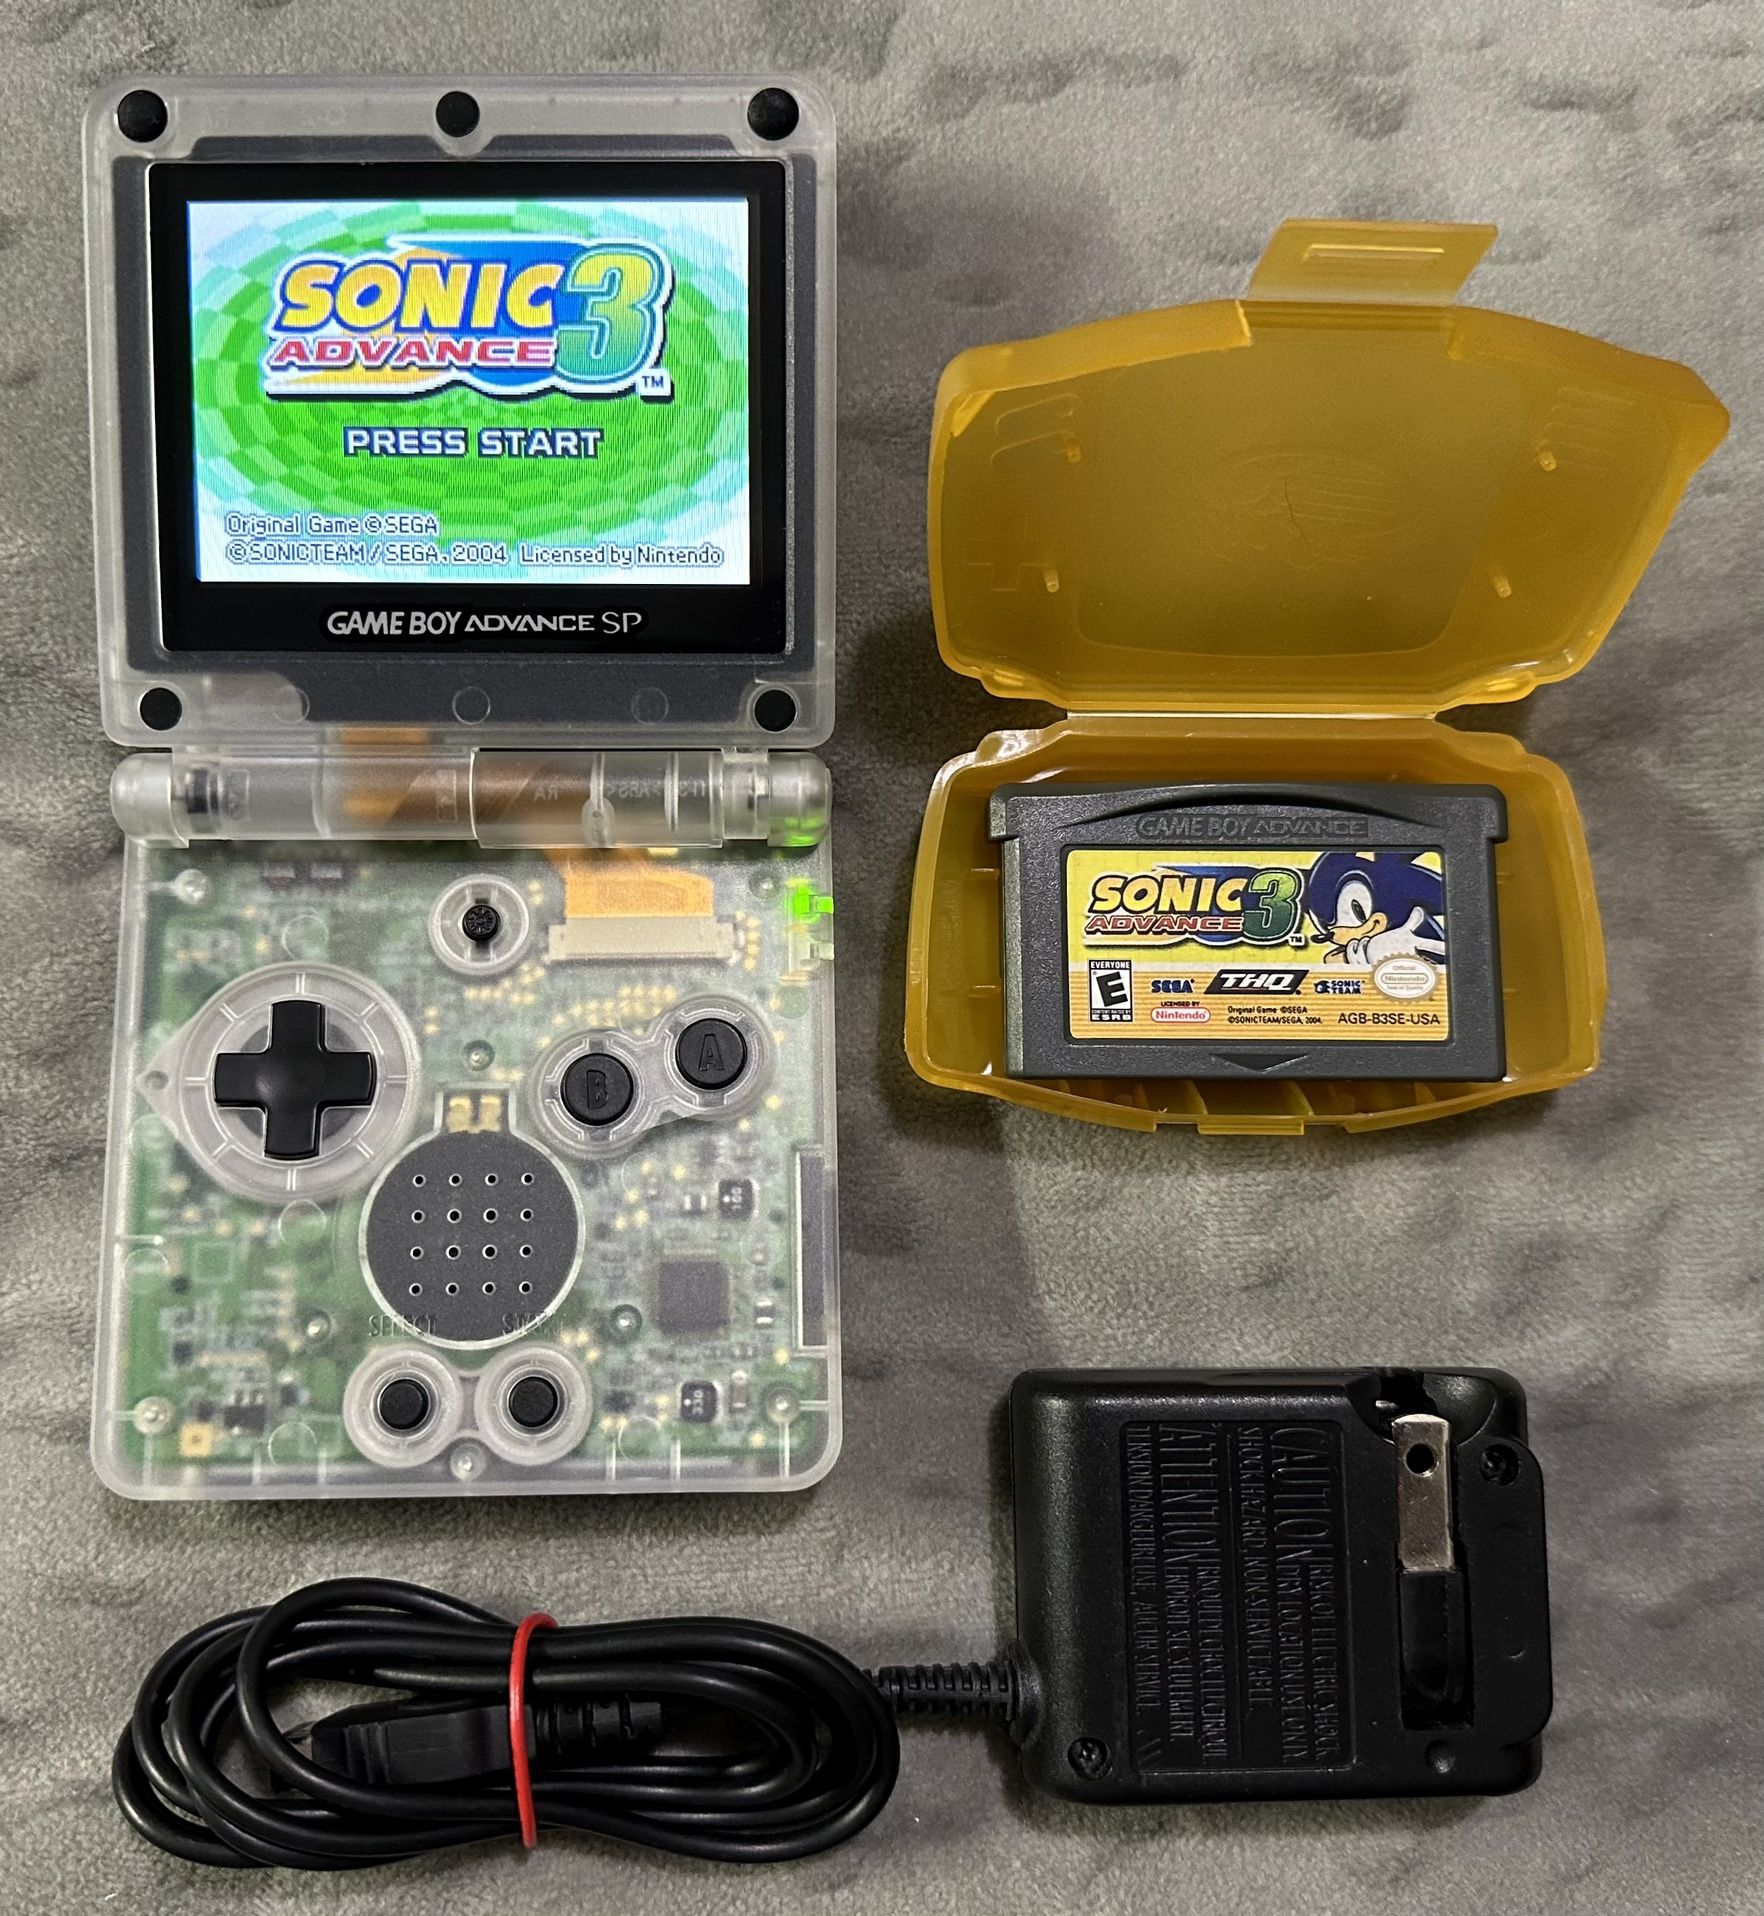 Nintendo Gameboy Advance Sonic Sonic Shell Funnyplaying for 